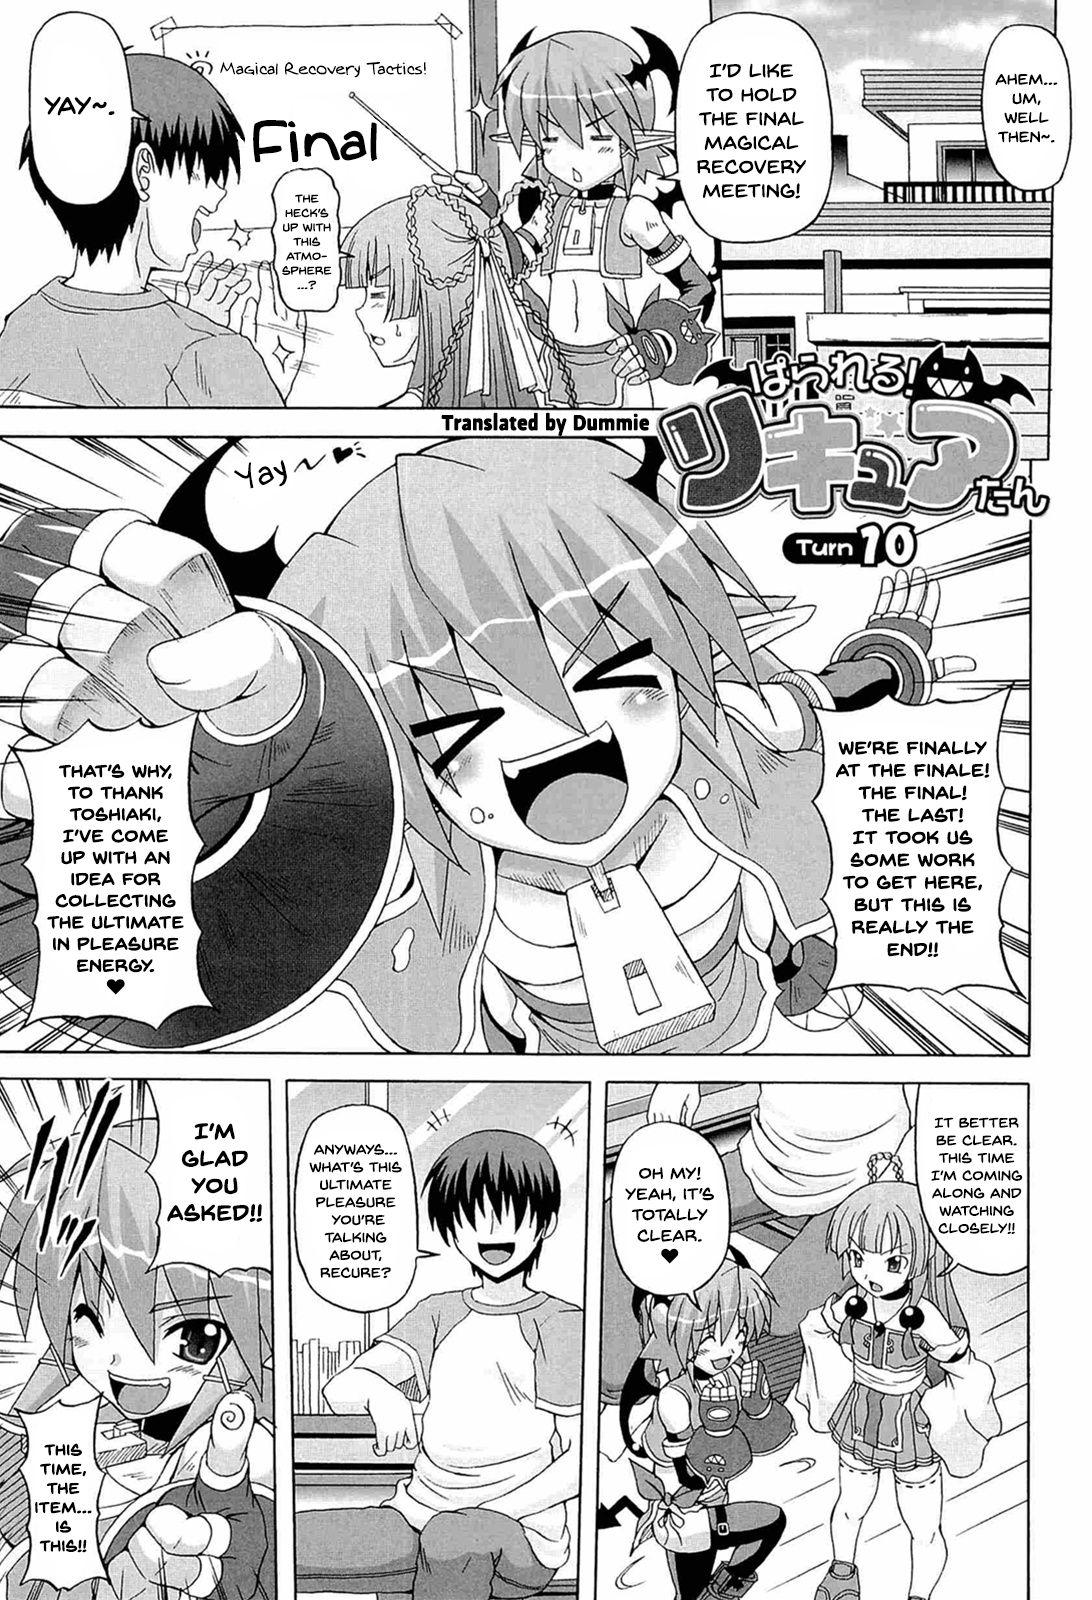 Lover Parallel! Recure-tan Turn 10 Amatur Porn - Page 1